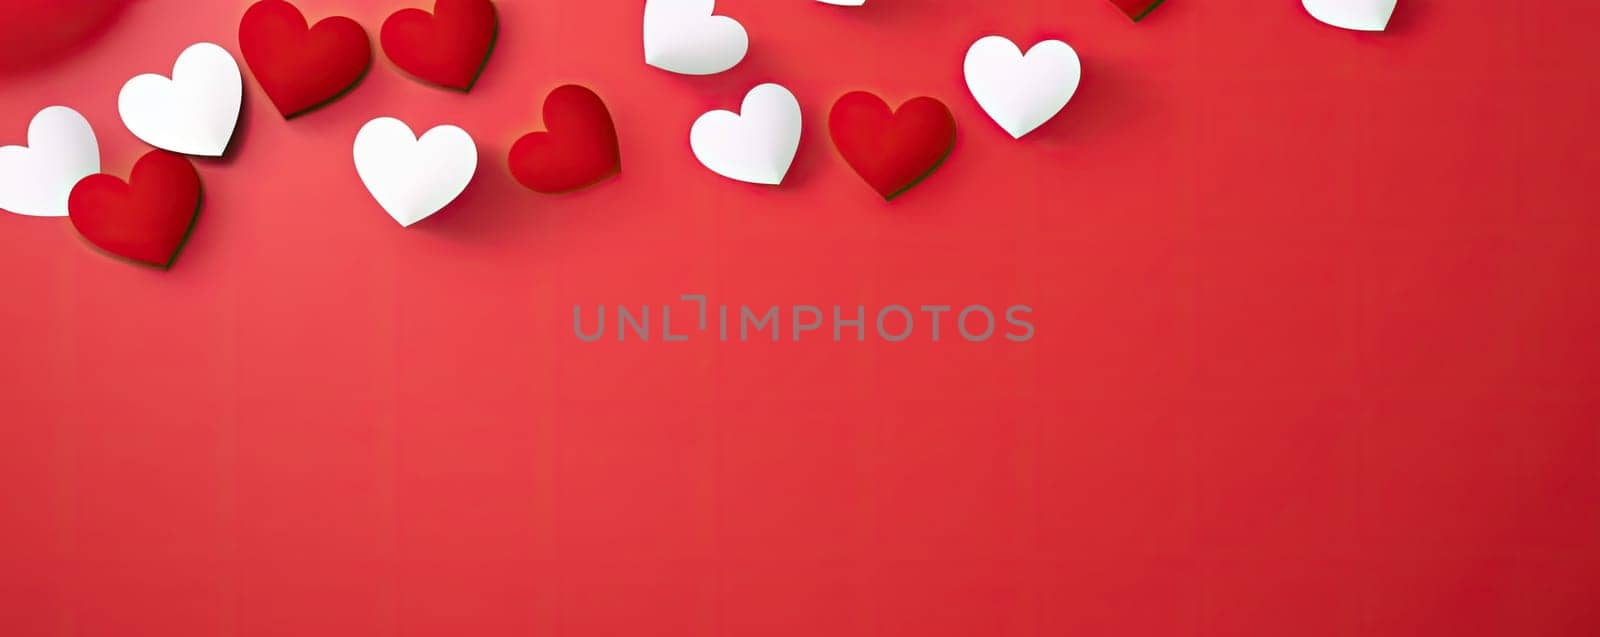 Rich red and white hearts on a deep red background create a rush of feelings and give the image brightness and emotional tension. by Yurich32